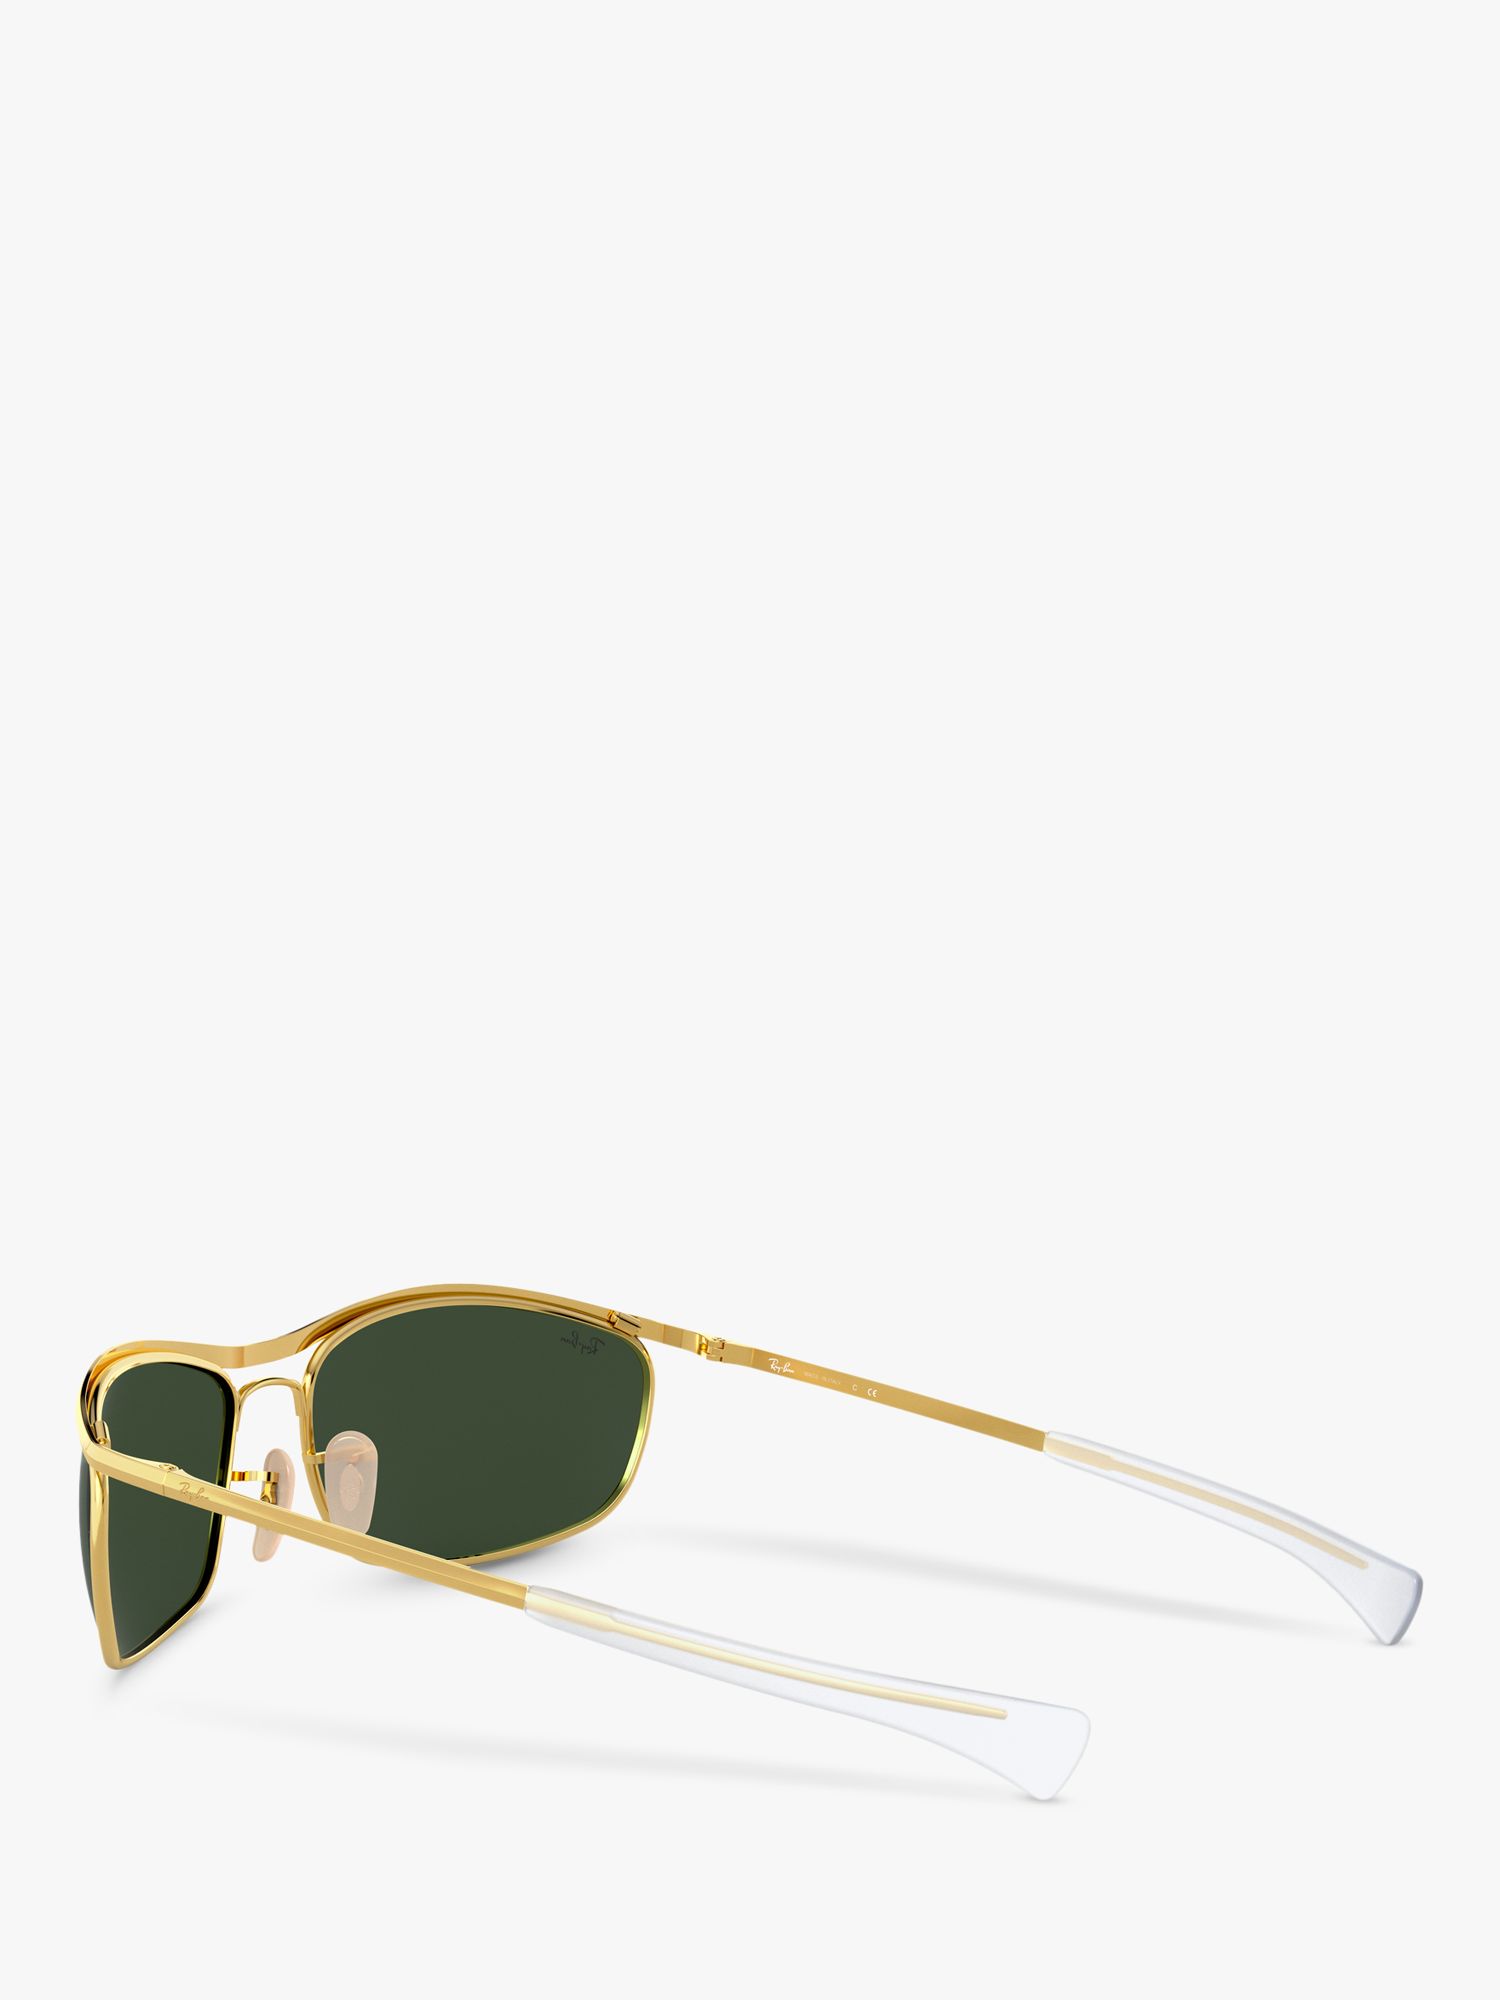 Ray-Ban RB3119M Unisex Wrap Sunglasses, Gold/Green at John Lewis & Partners